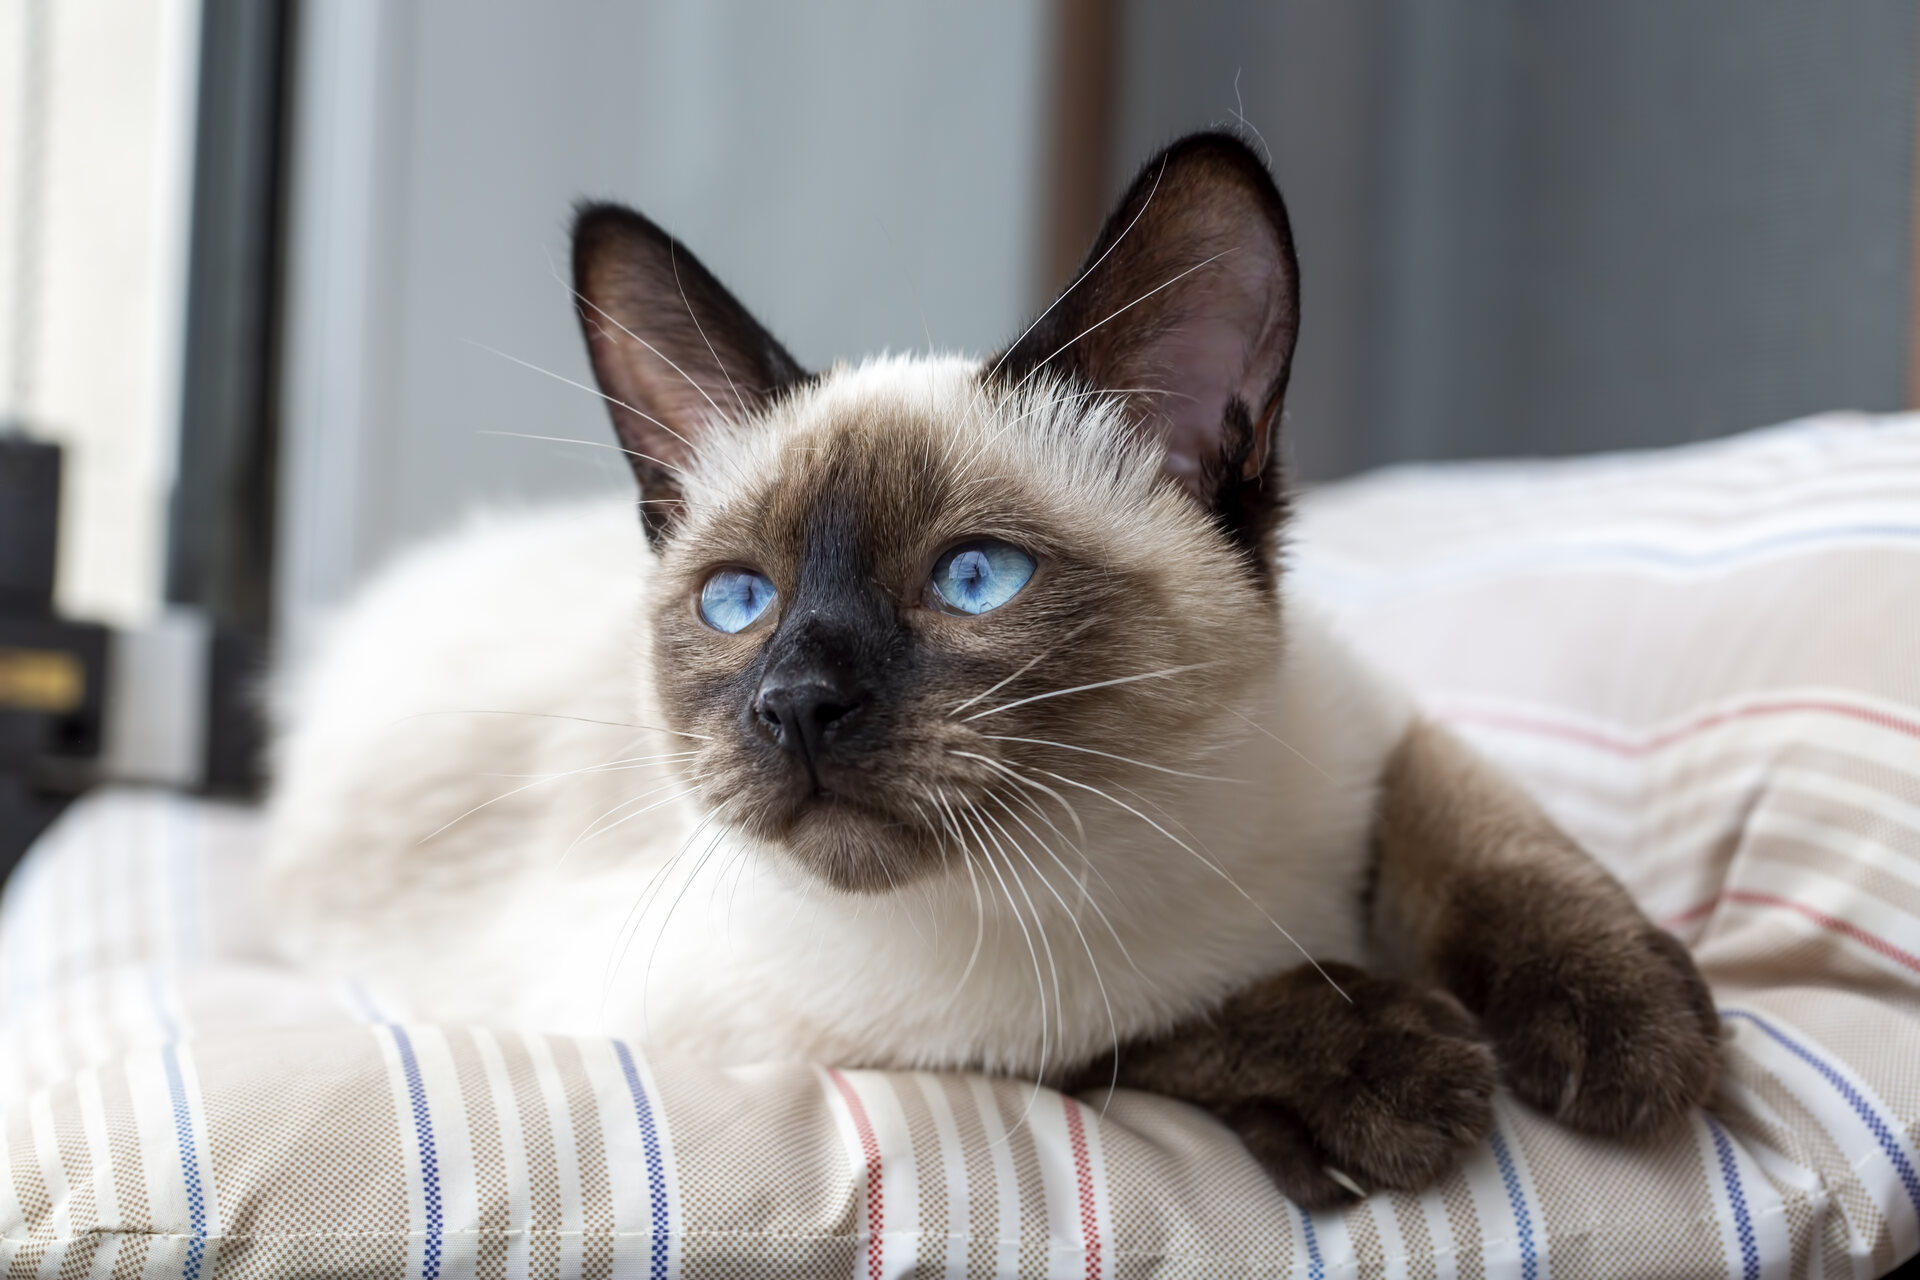 A Siamese cat sitting in bed